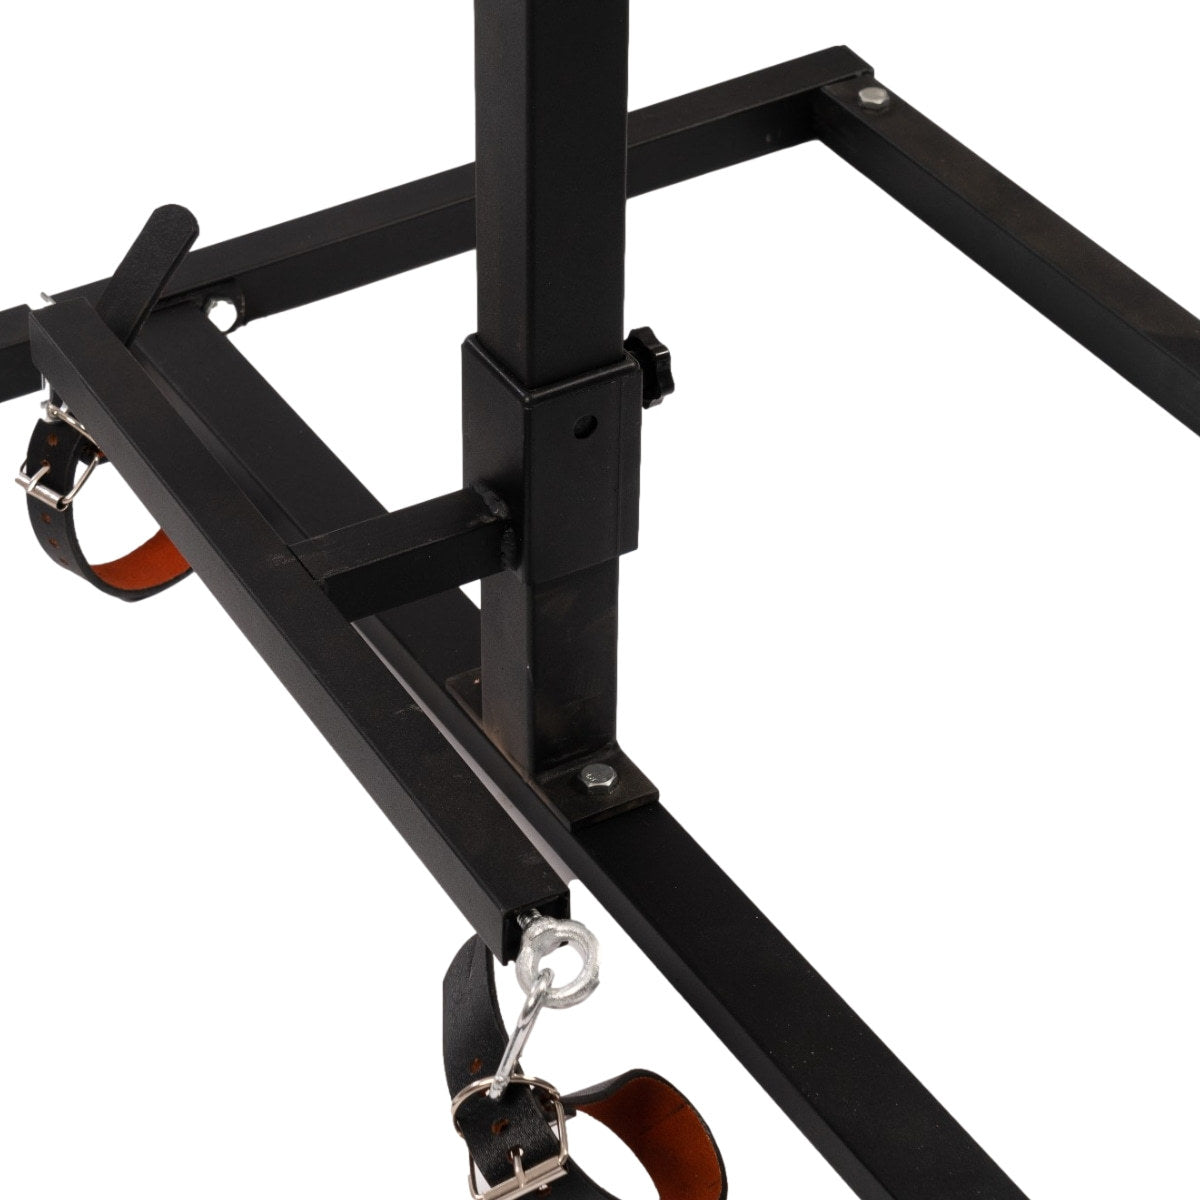 Roomsacred Black Series Forced Pleasure Pillory with Fully Adjustable Suction Cup Base with Separate Viberator Holder